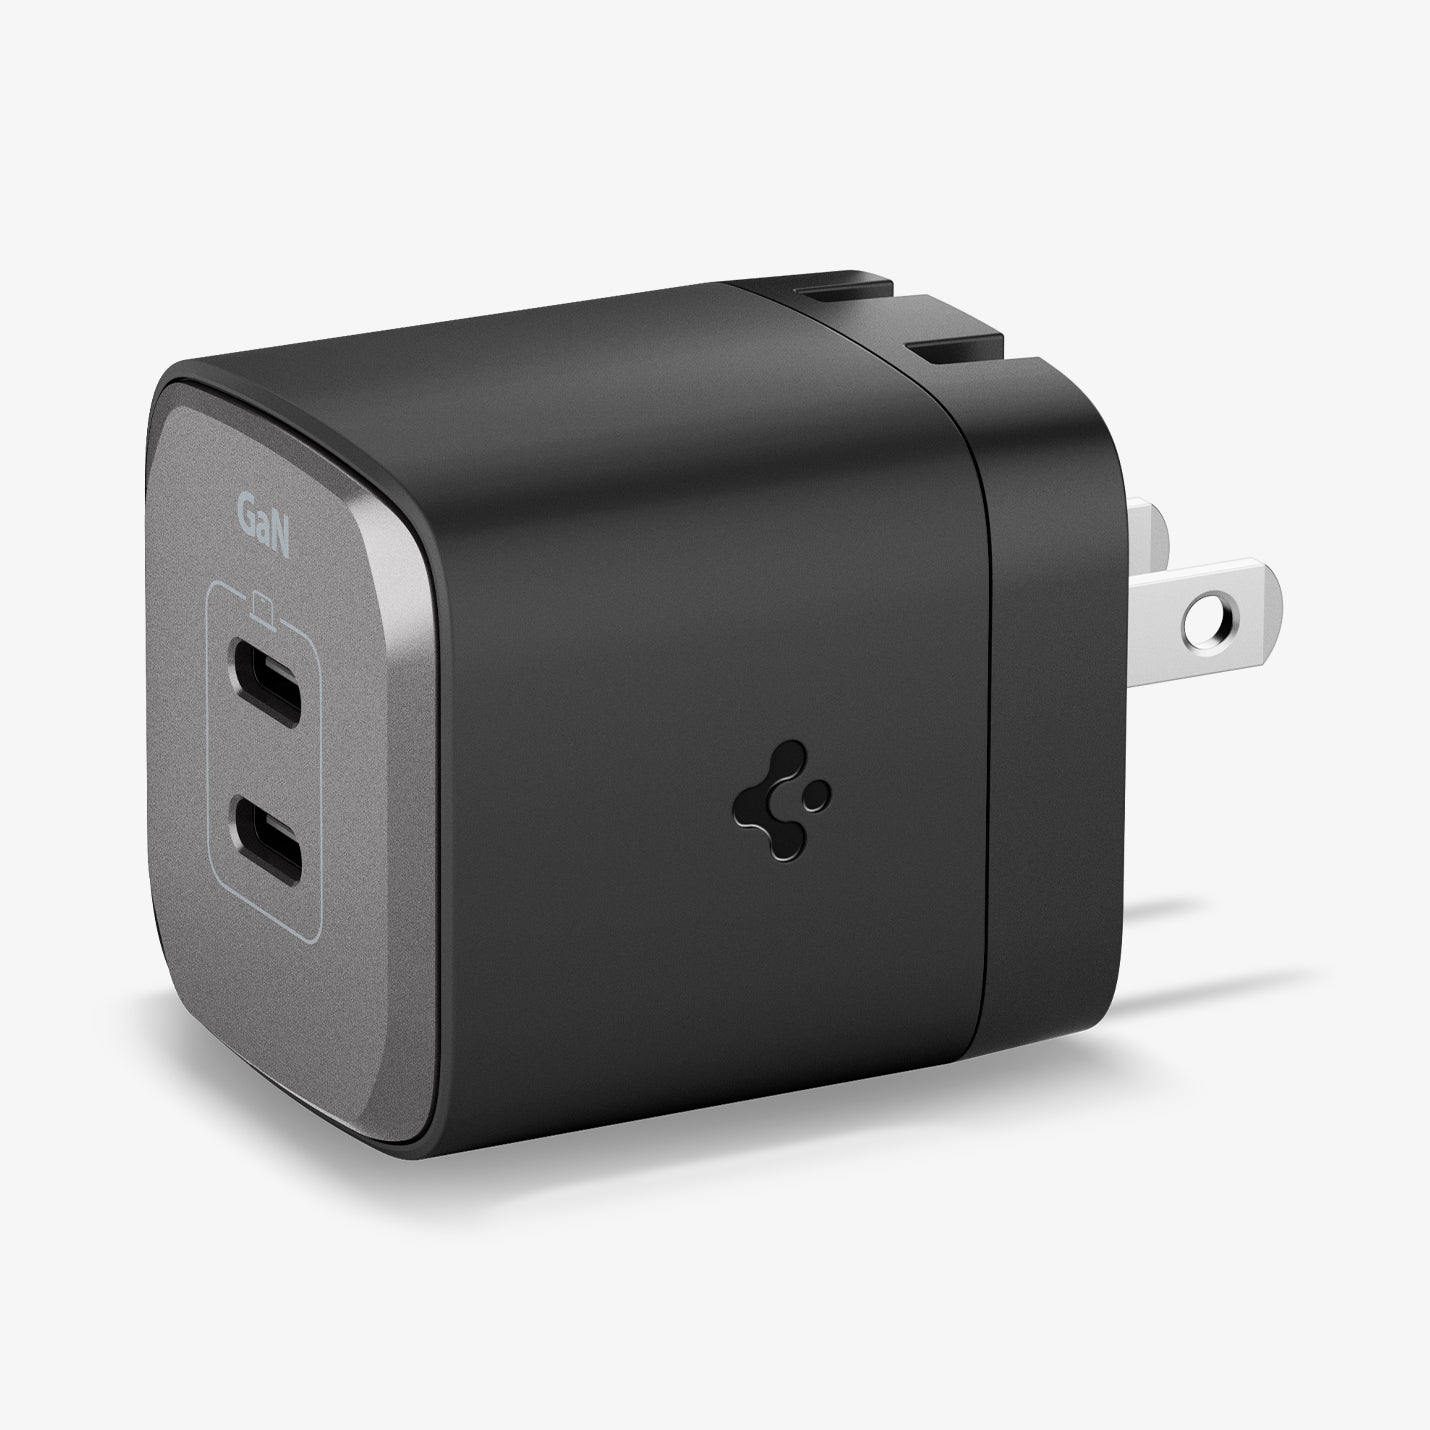 ACH05151 - ArcStation™ Pro GaN 452 Dual USB-C Wall Charger PE2203 in Midnight Black showing the top and sides of a wall charger